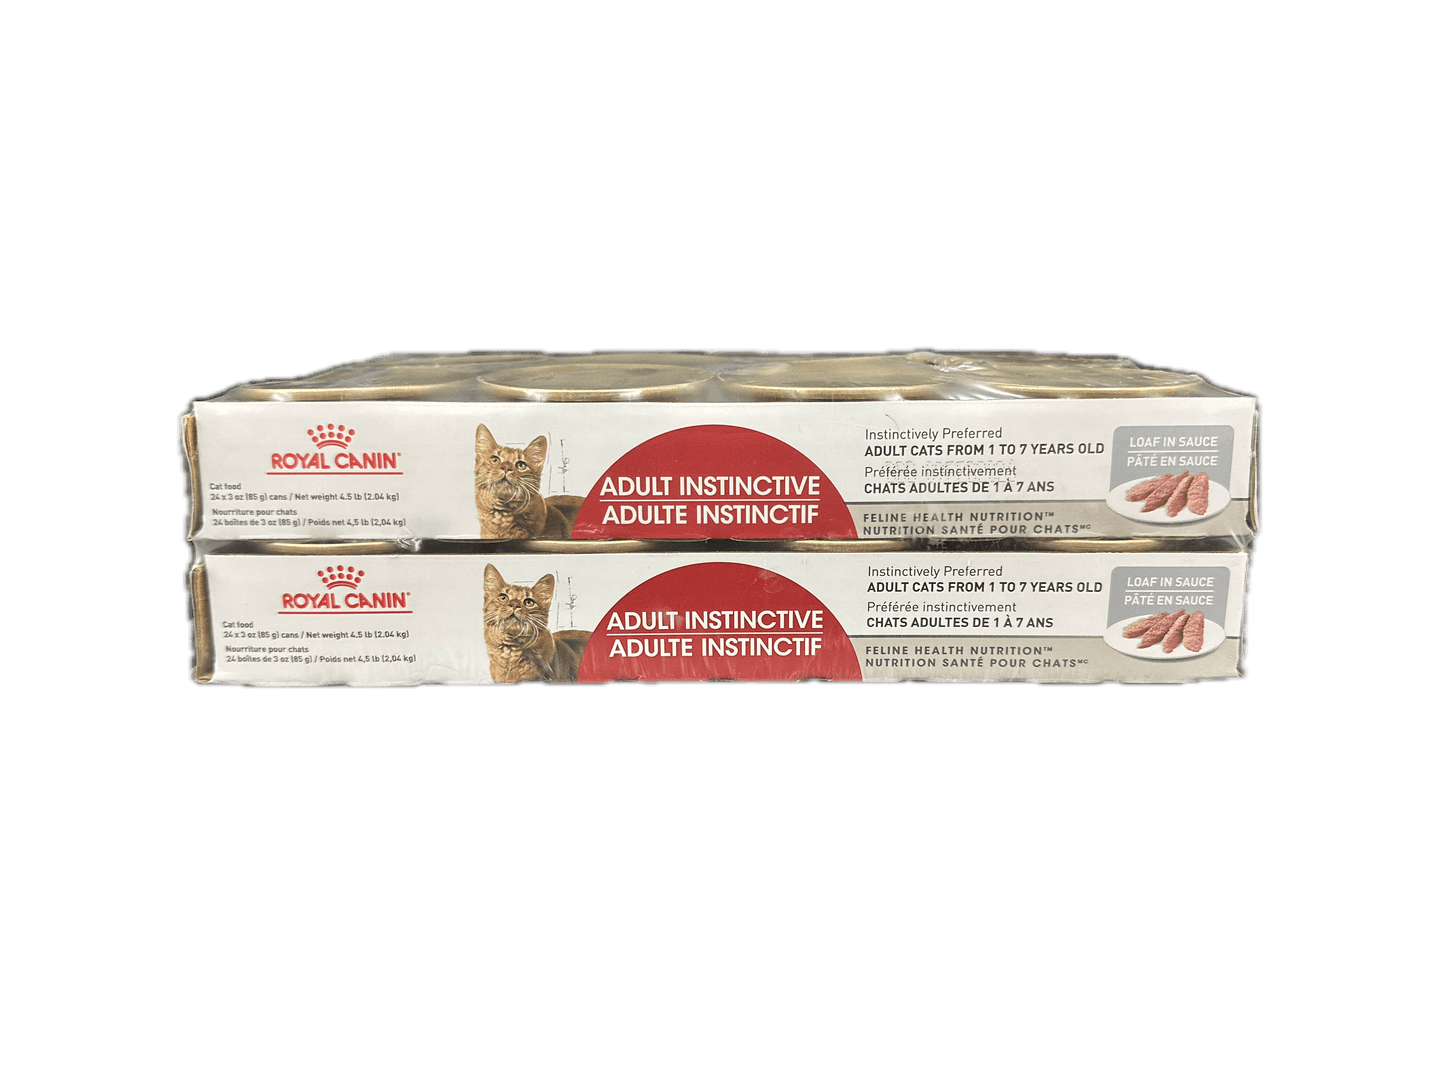 Royal Canin Canned Cat Food Adult Instinctive Loaf In Sauce - 85g / 24 Pack - Canned Cat Food - Royal Canin - PetMax Canada